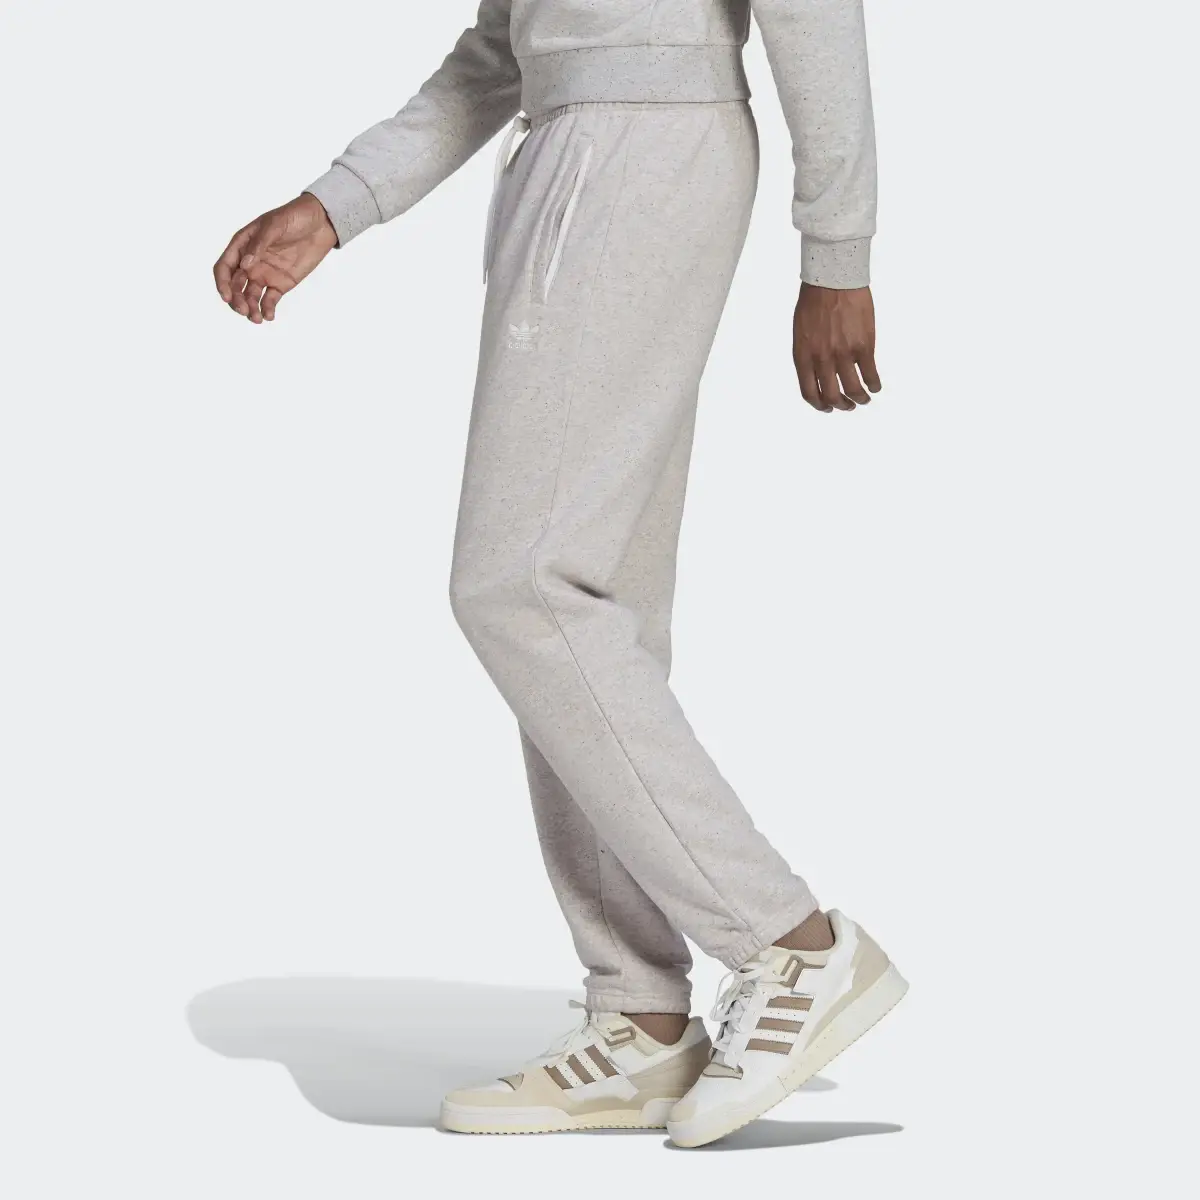 Adidas Essentials+ Made with Nature Sweat Pants. 2